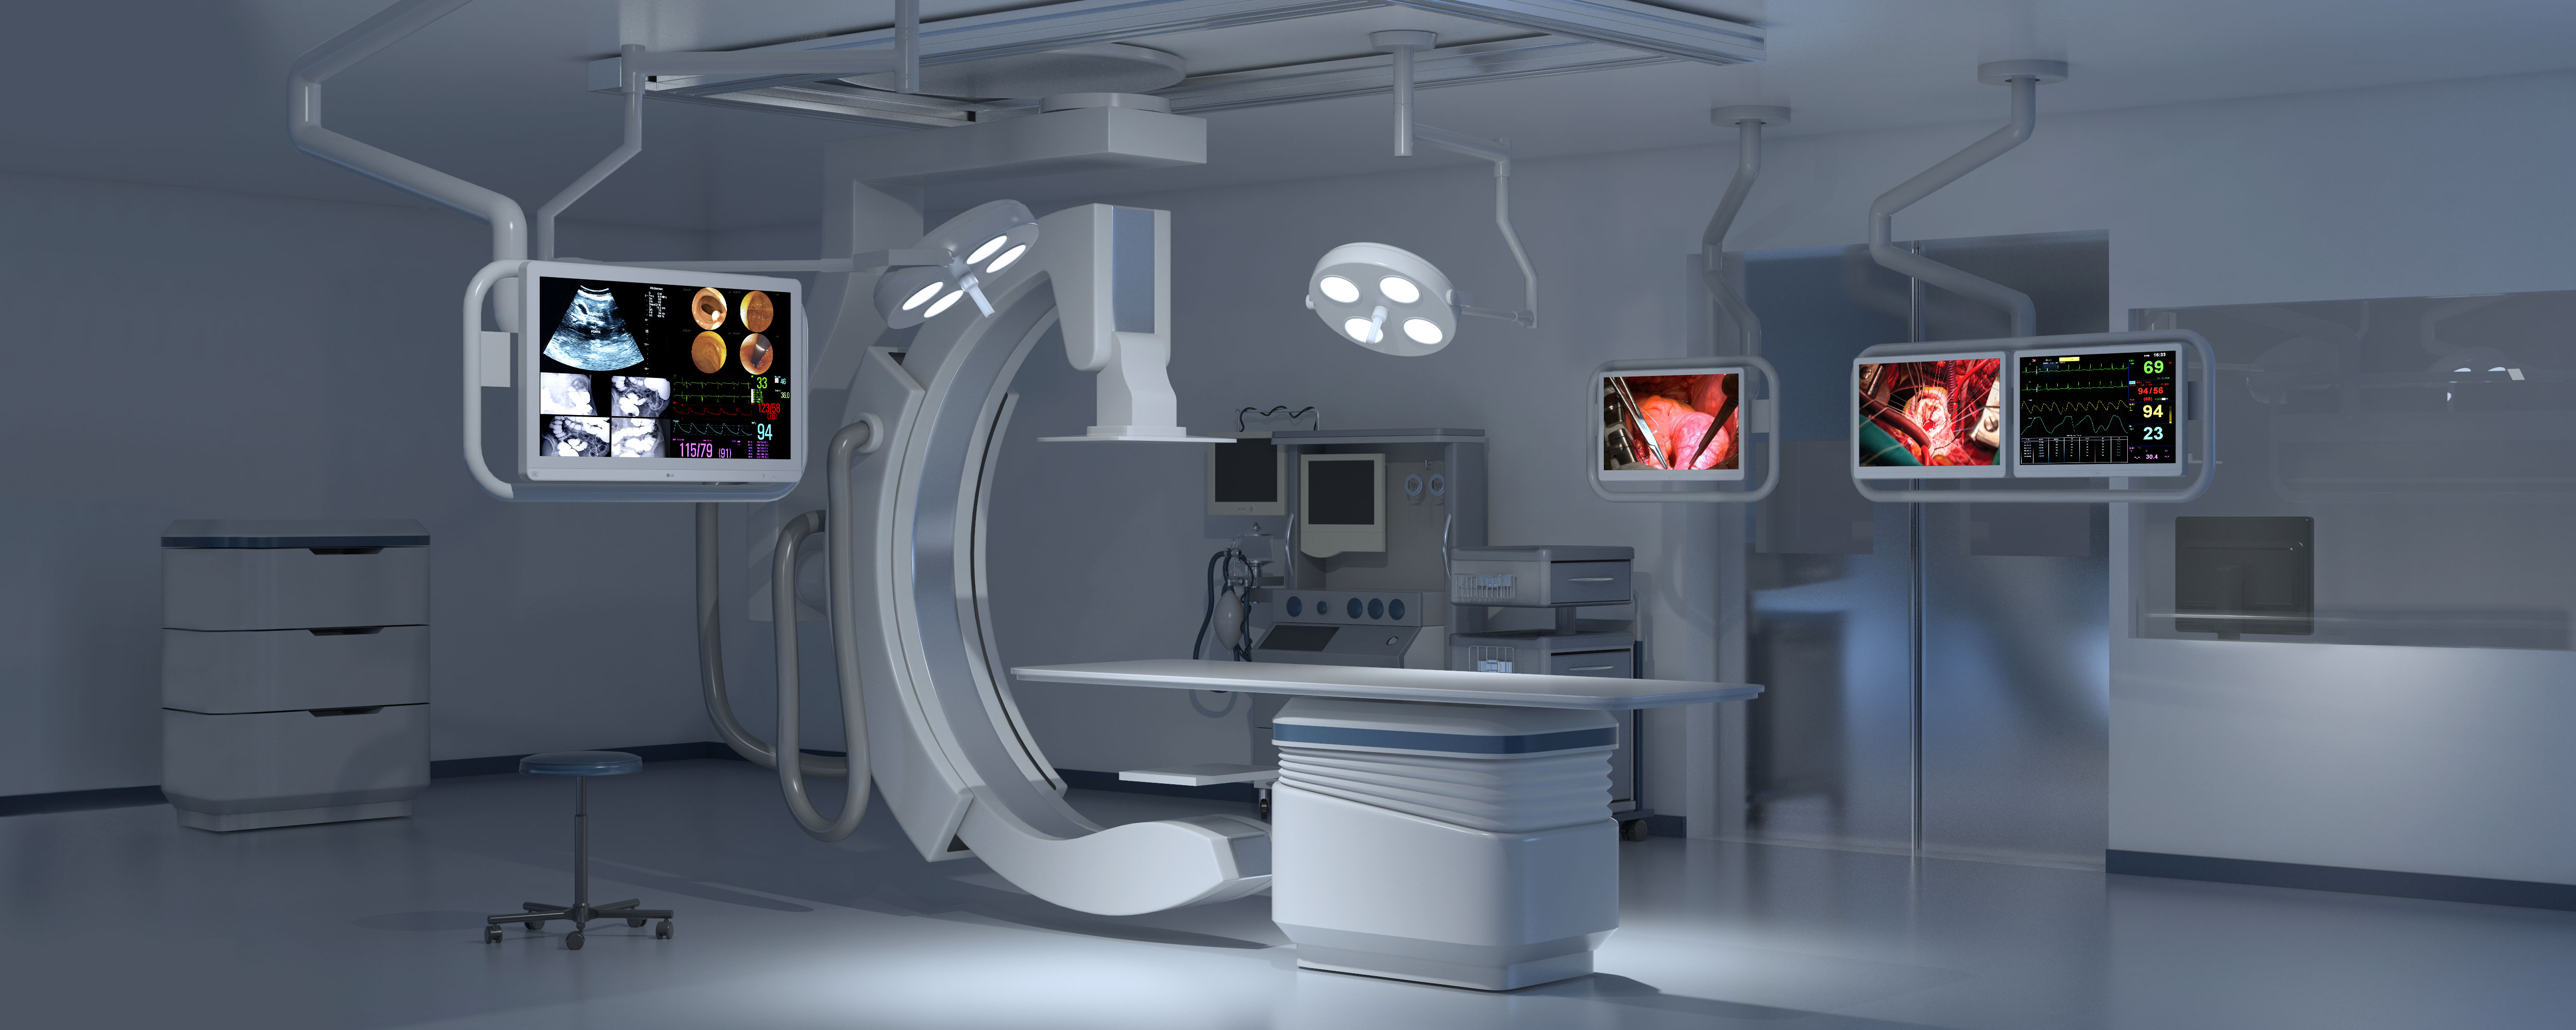 LG to Showcase Advanced Diagnostic and Imaging Technologies ...